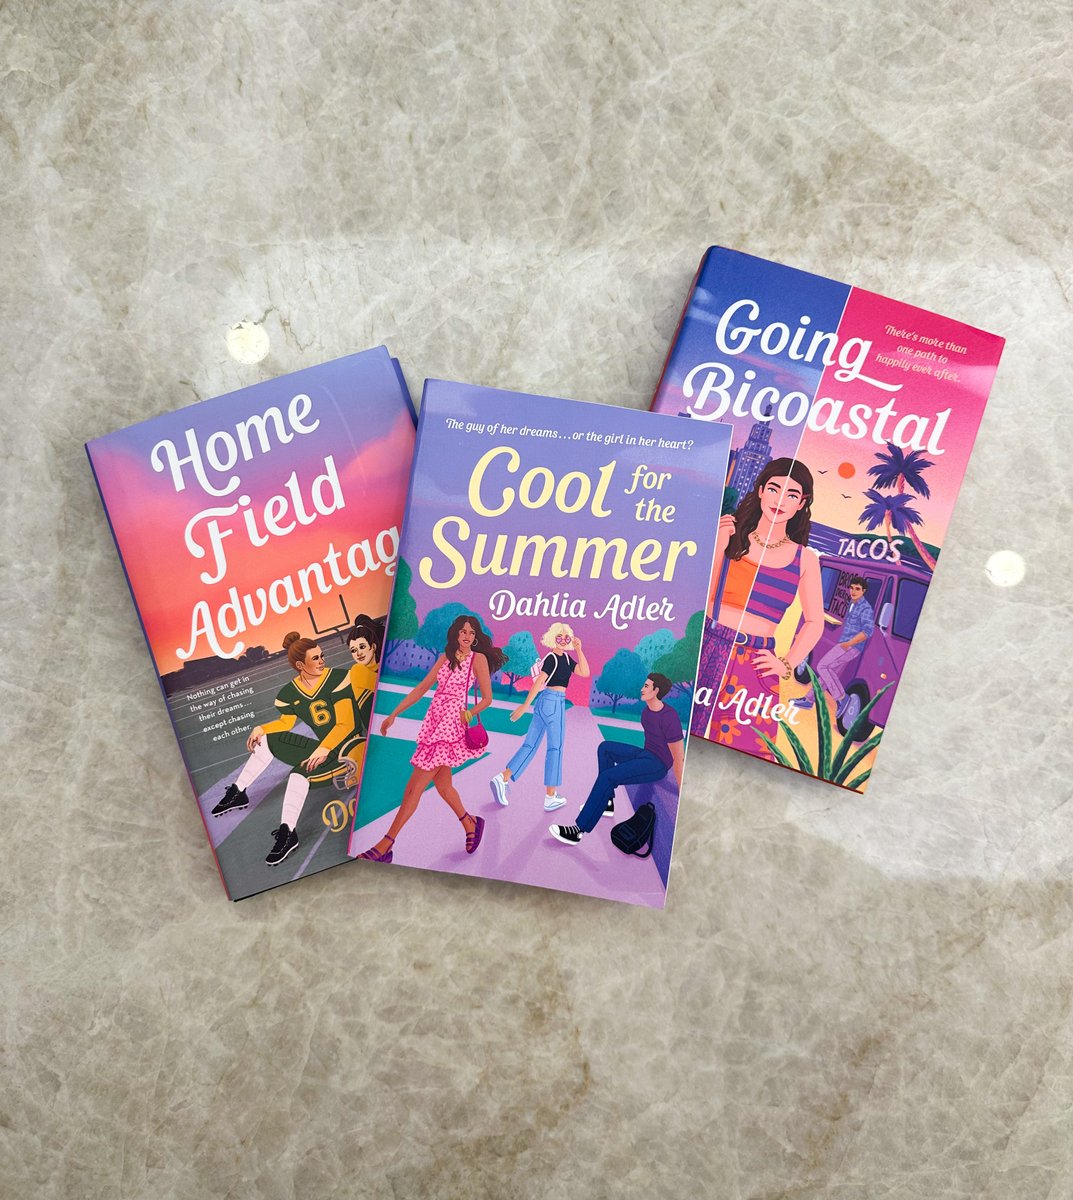 ✨THE DAHLIA ADLER TRIFECTA ✨

Looking for queer romances to fill your summer TBR? Look no further than these three fabulous books from LGBTQ Reads founder @MissDahlELama! COOL FOR THE SUMMER, HOME FIELD ADVANTAGE, and GOING BICOASTAL are available now!